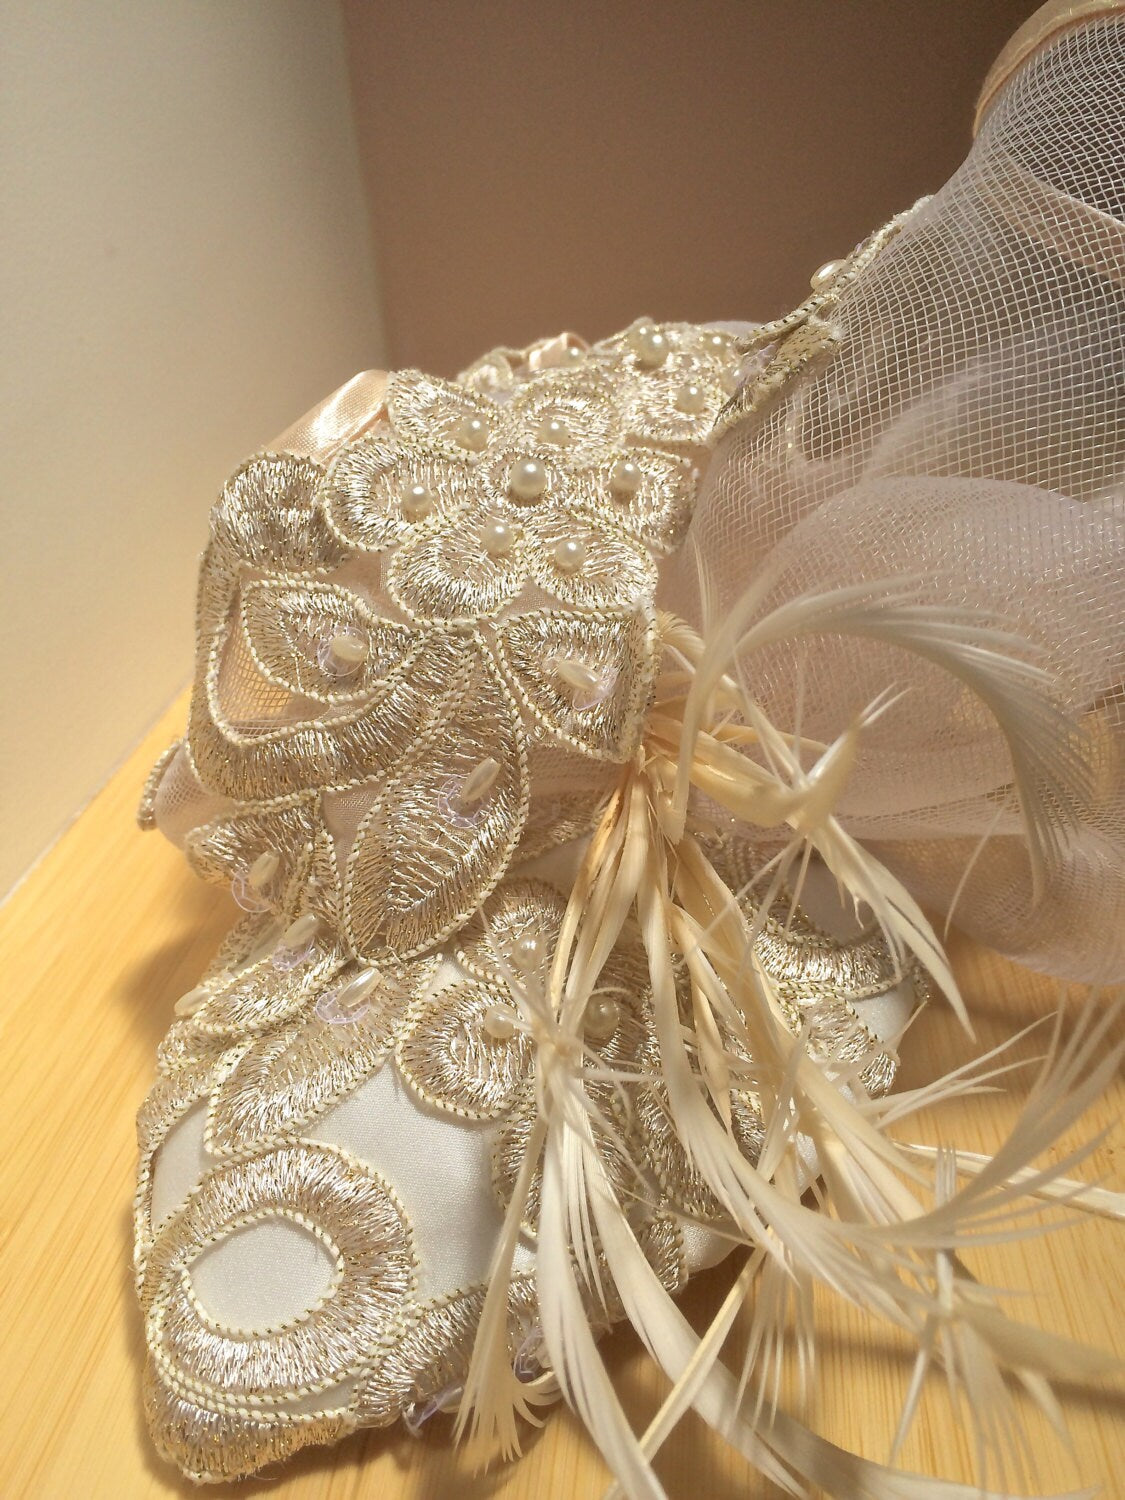 Ivory Embroidered Lace Fascinator with Gold Metallic threads and Pearls. Embellished with Feathers and Silk Trimmed Crinoline.